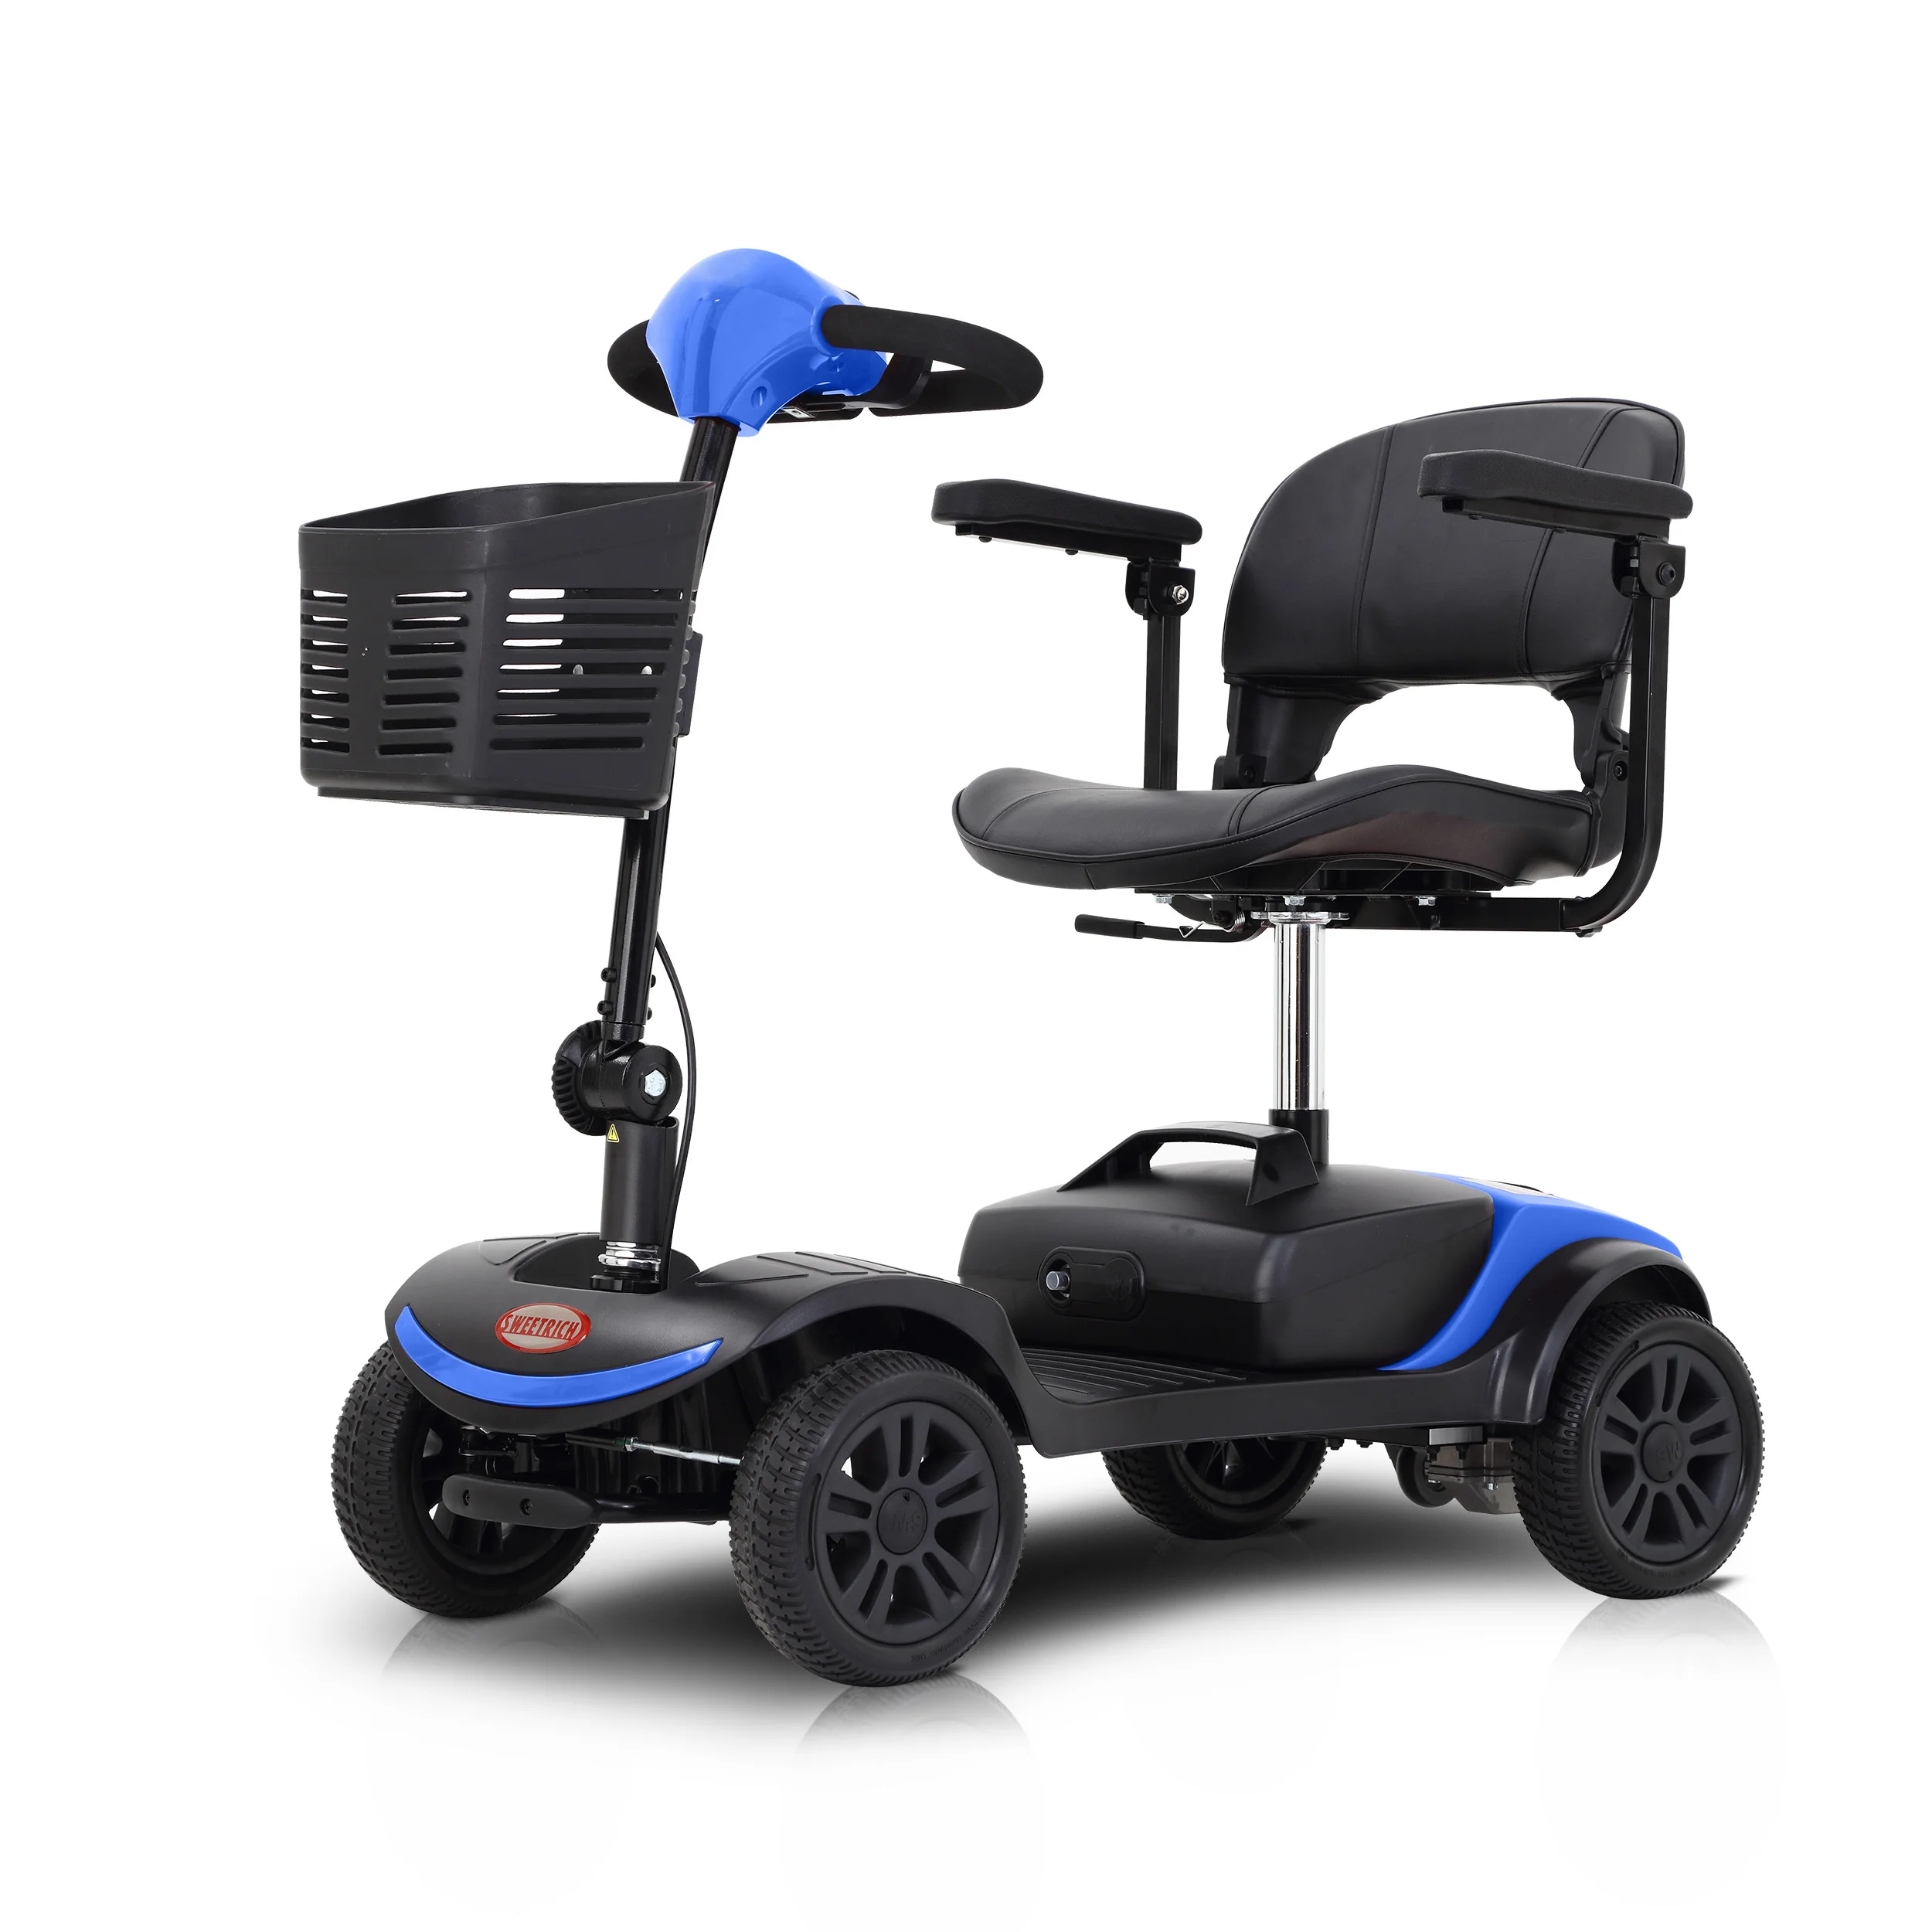 

Old people scooter 4 wheels electric mobility portable scooter 300W ST096 CE, Red , blue, or customized